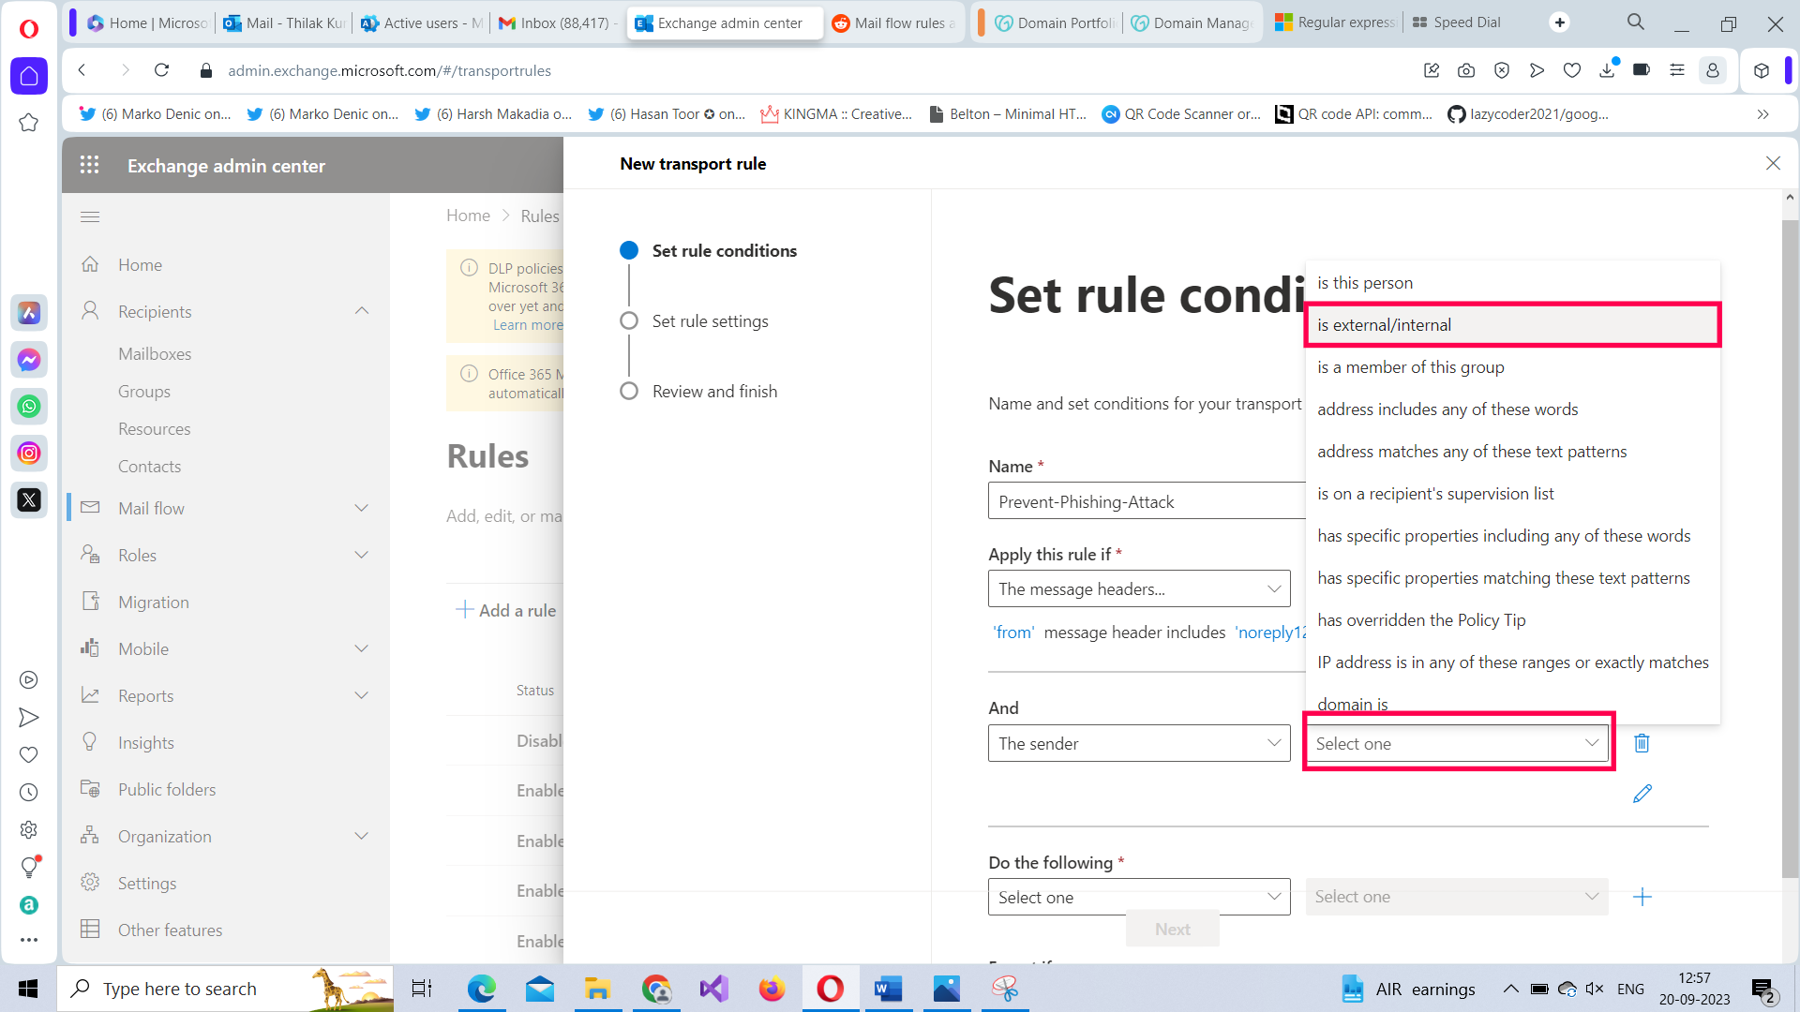 This screenshot shows how you can set 'the sender value' as 'is external or internal' as one of the conditions for the mail flow rule being configured. 